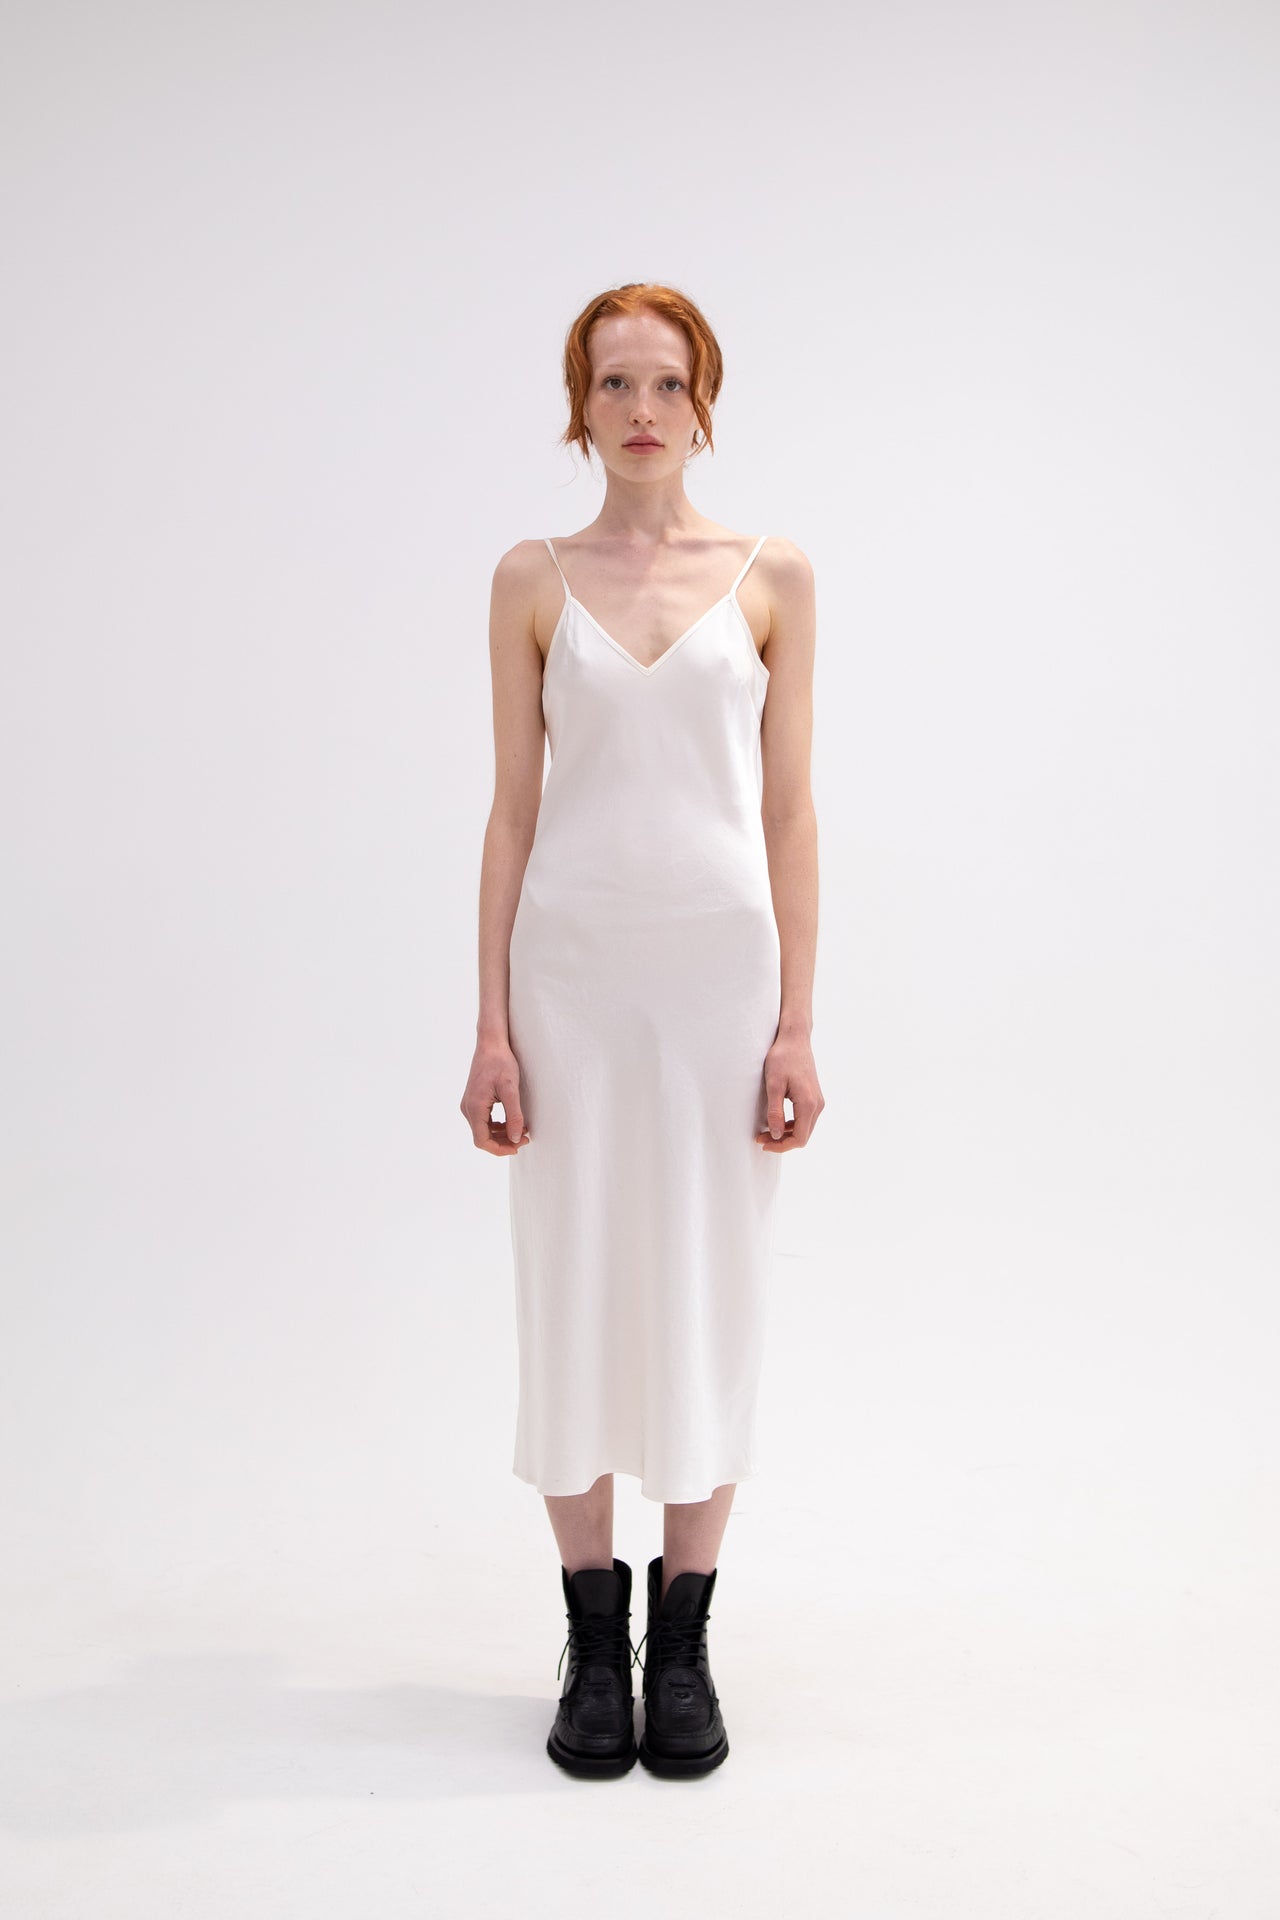 Silky Nina slip for laying underneath wrap, classic slip dress silhouette or wear in its own